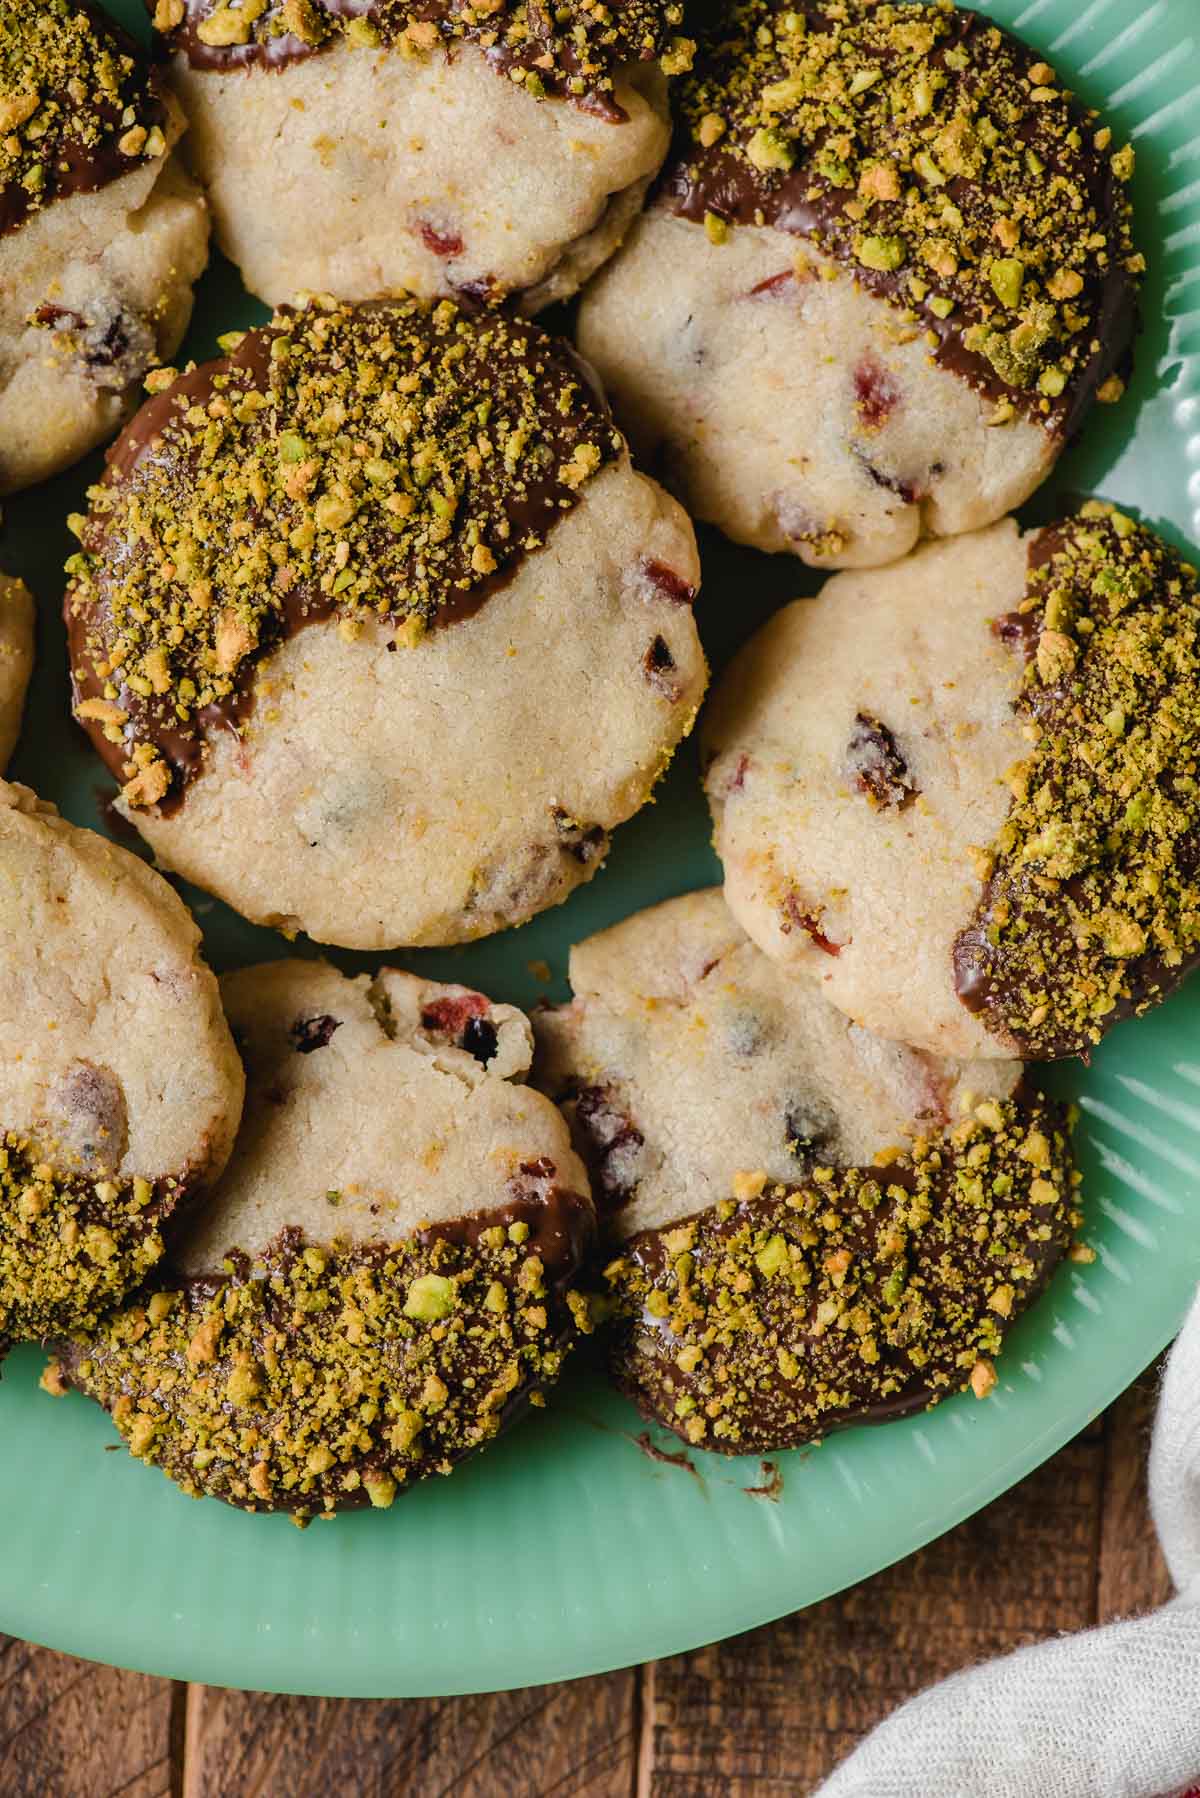 Vintage jadette plate with chocolate cranberry pistachio shortbread cookies on top.